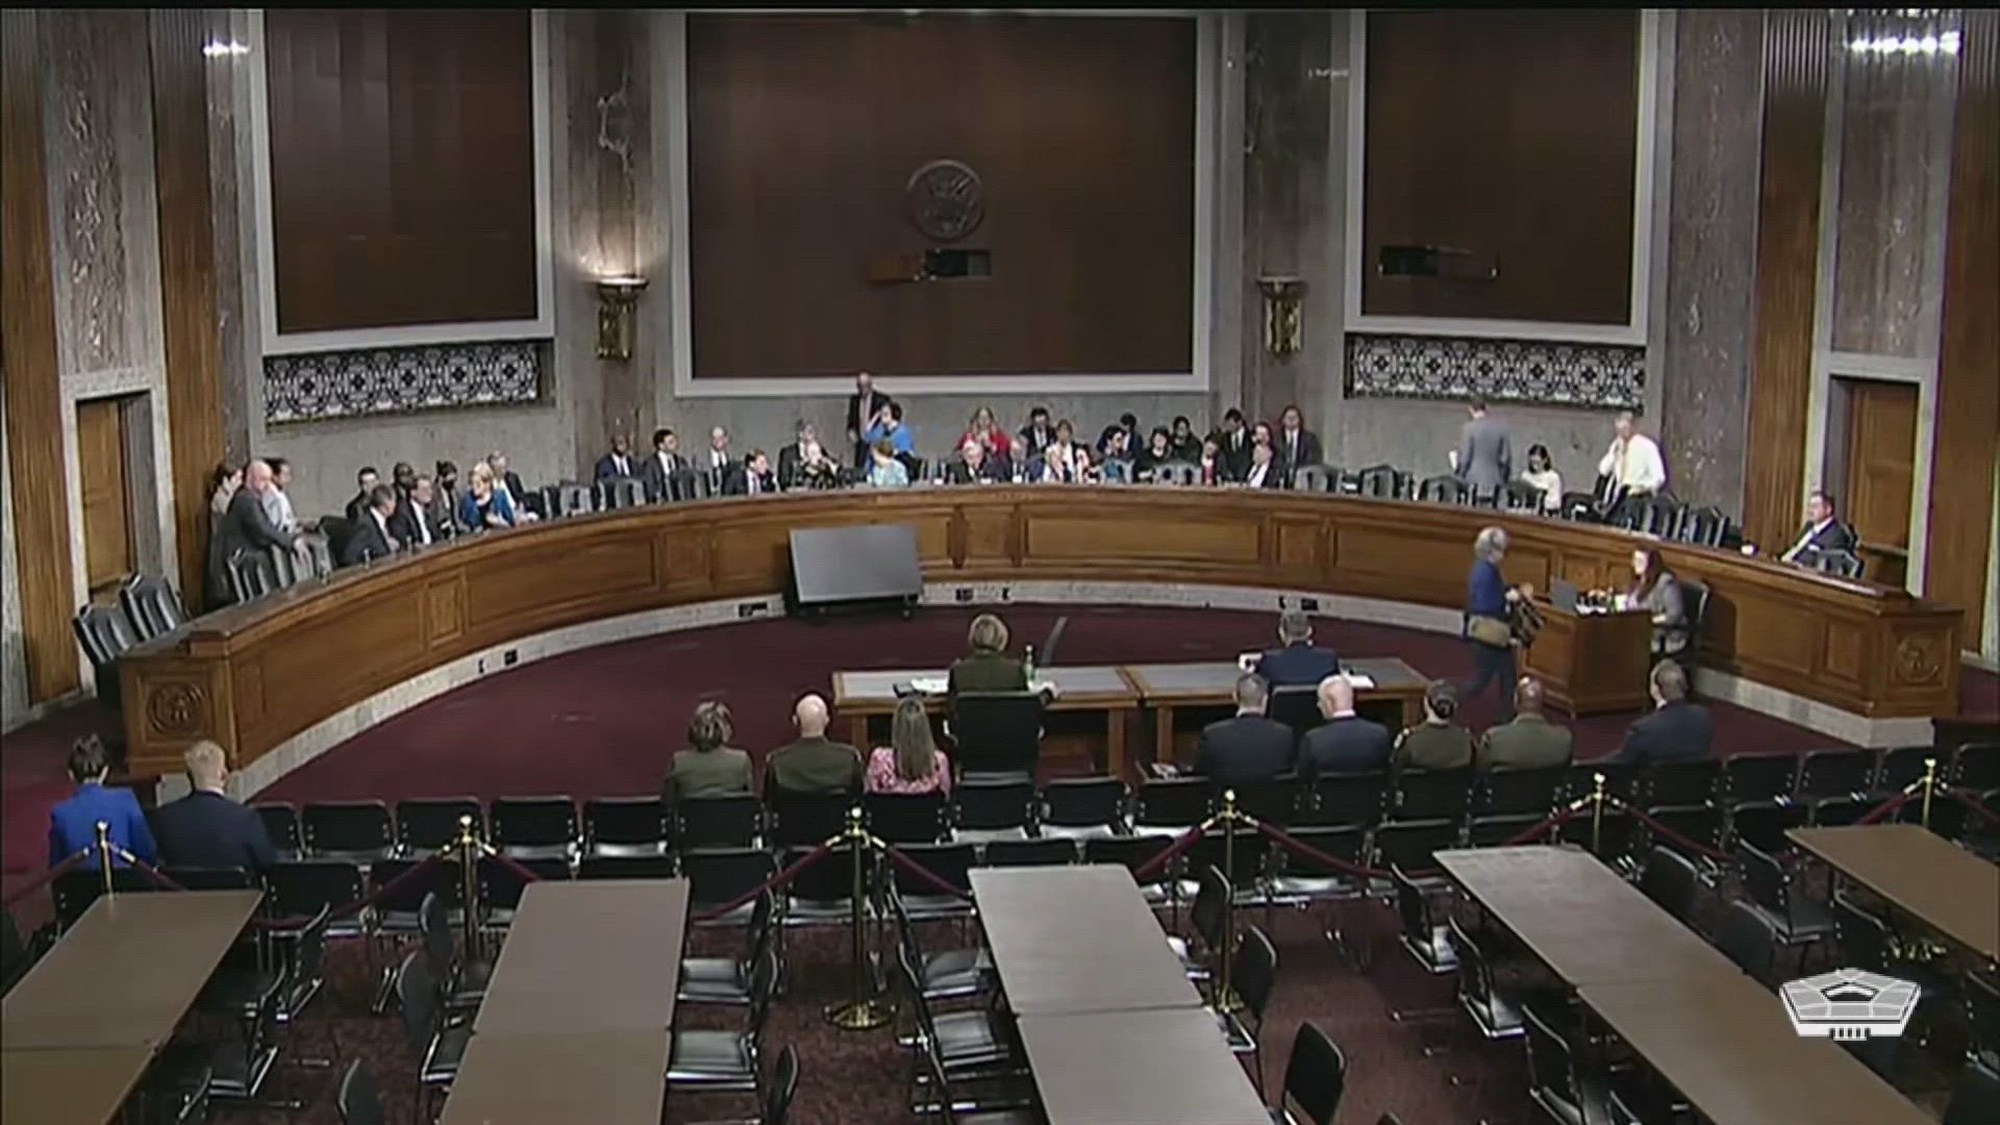 Air Force Gen. Glen D. VanHerck, commander of U.S. Northern Command and North American Aerospace Defense Command, and Army Gen. Laura J. Richardson, commander of U.S. Southern Command, testify about the defense authorization request for fiscal year 2024 and future years during a hearing of the Senate Armed Services Committee.